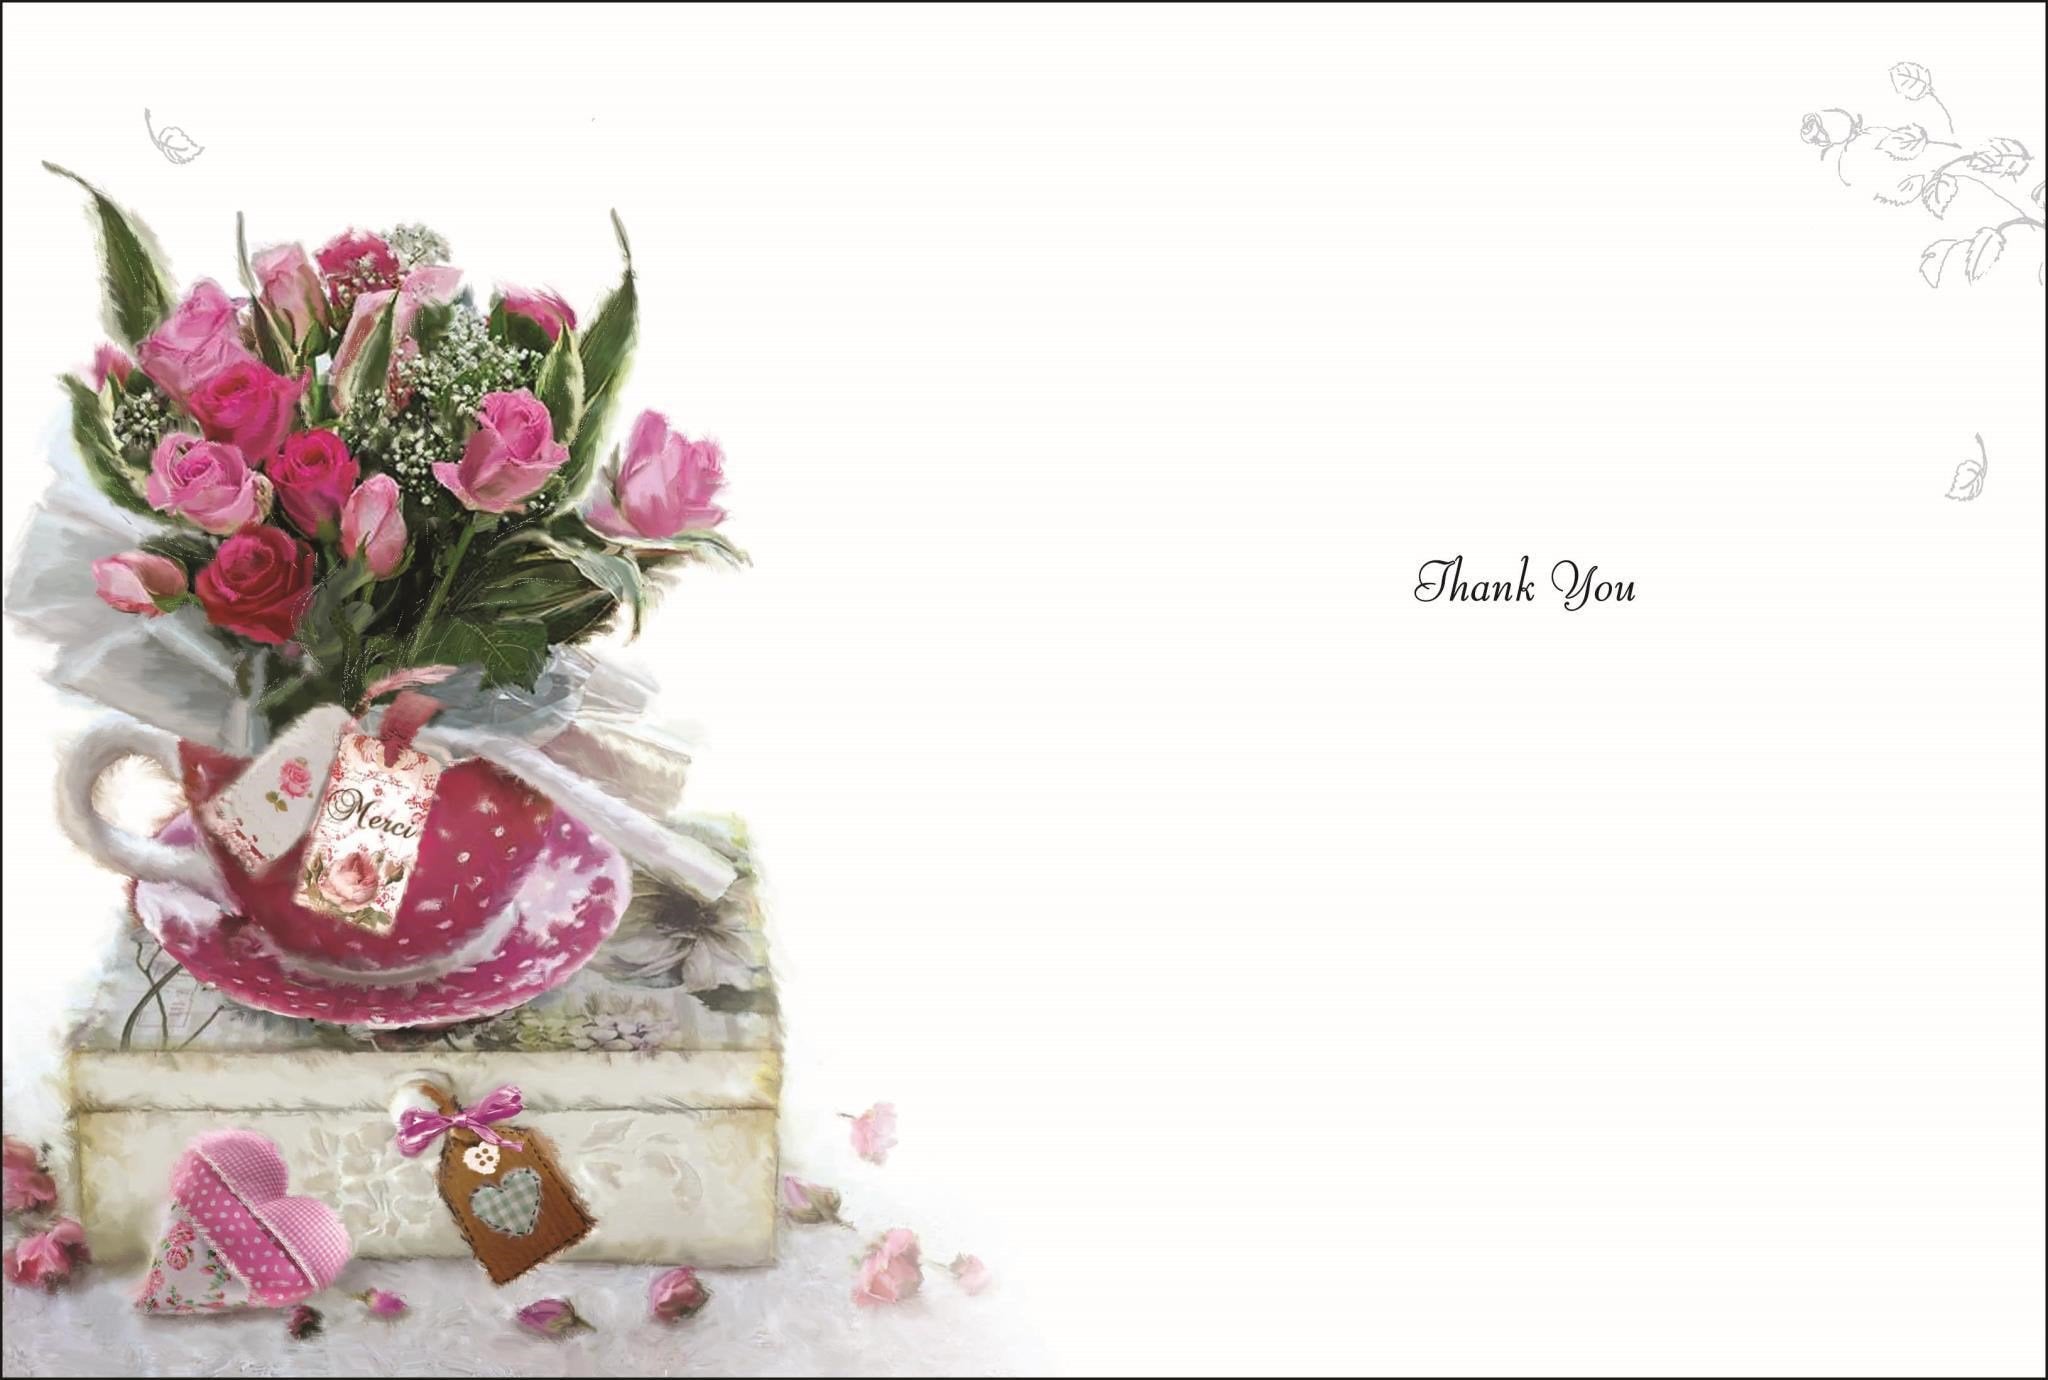 Inside of Thank You Roses in Teacup Greetings Card